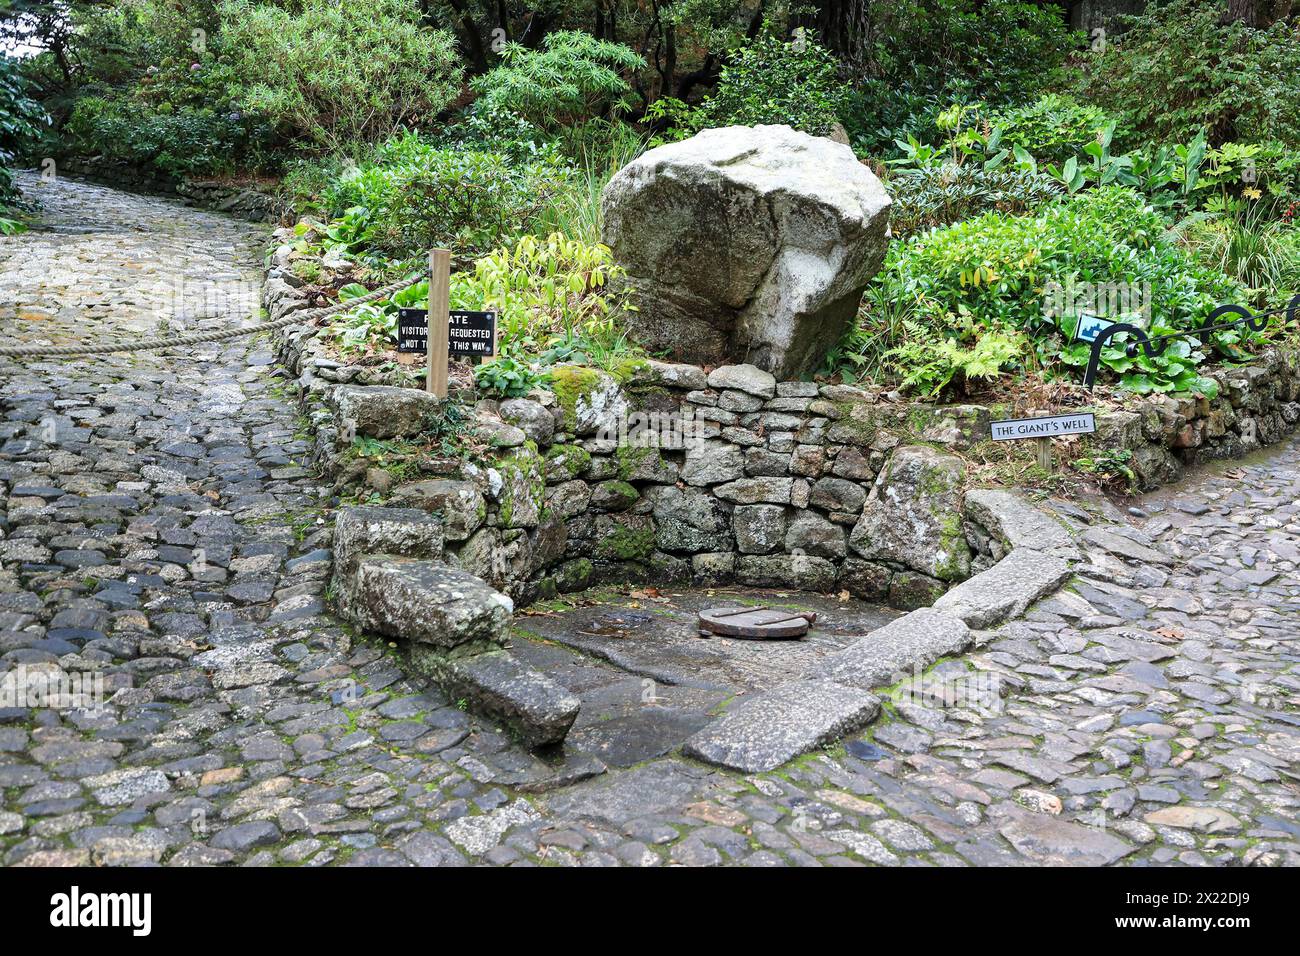 The Giant's Well and the Giant's heart, which is a stone, St Michael's Mount, Mount's Bay, Marazion, Penzance, Cornwall, England, United Kingdom Stock Photo